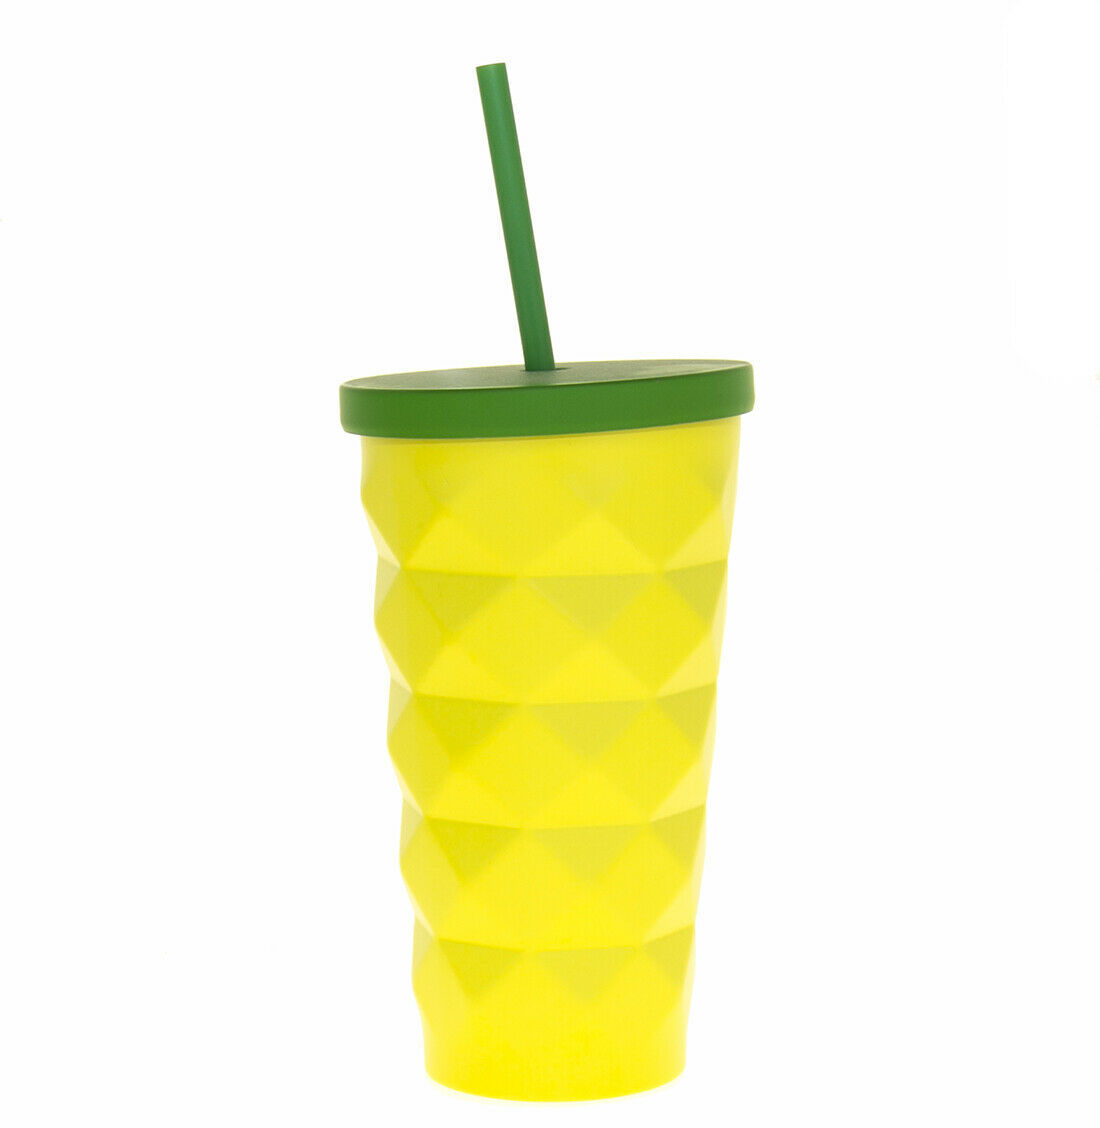 Starbucks Hawaii Yellow Pineapple Relief Stainless Steel Cold Cup 16 oz Tumbler